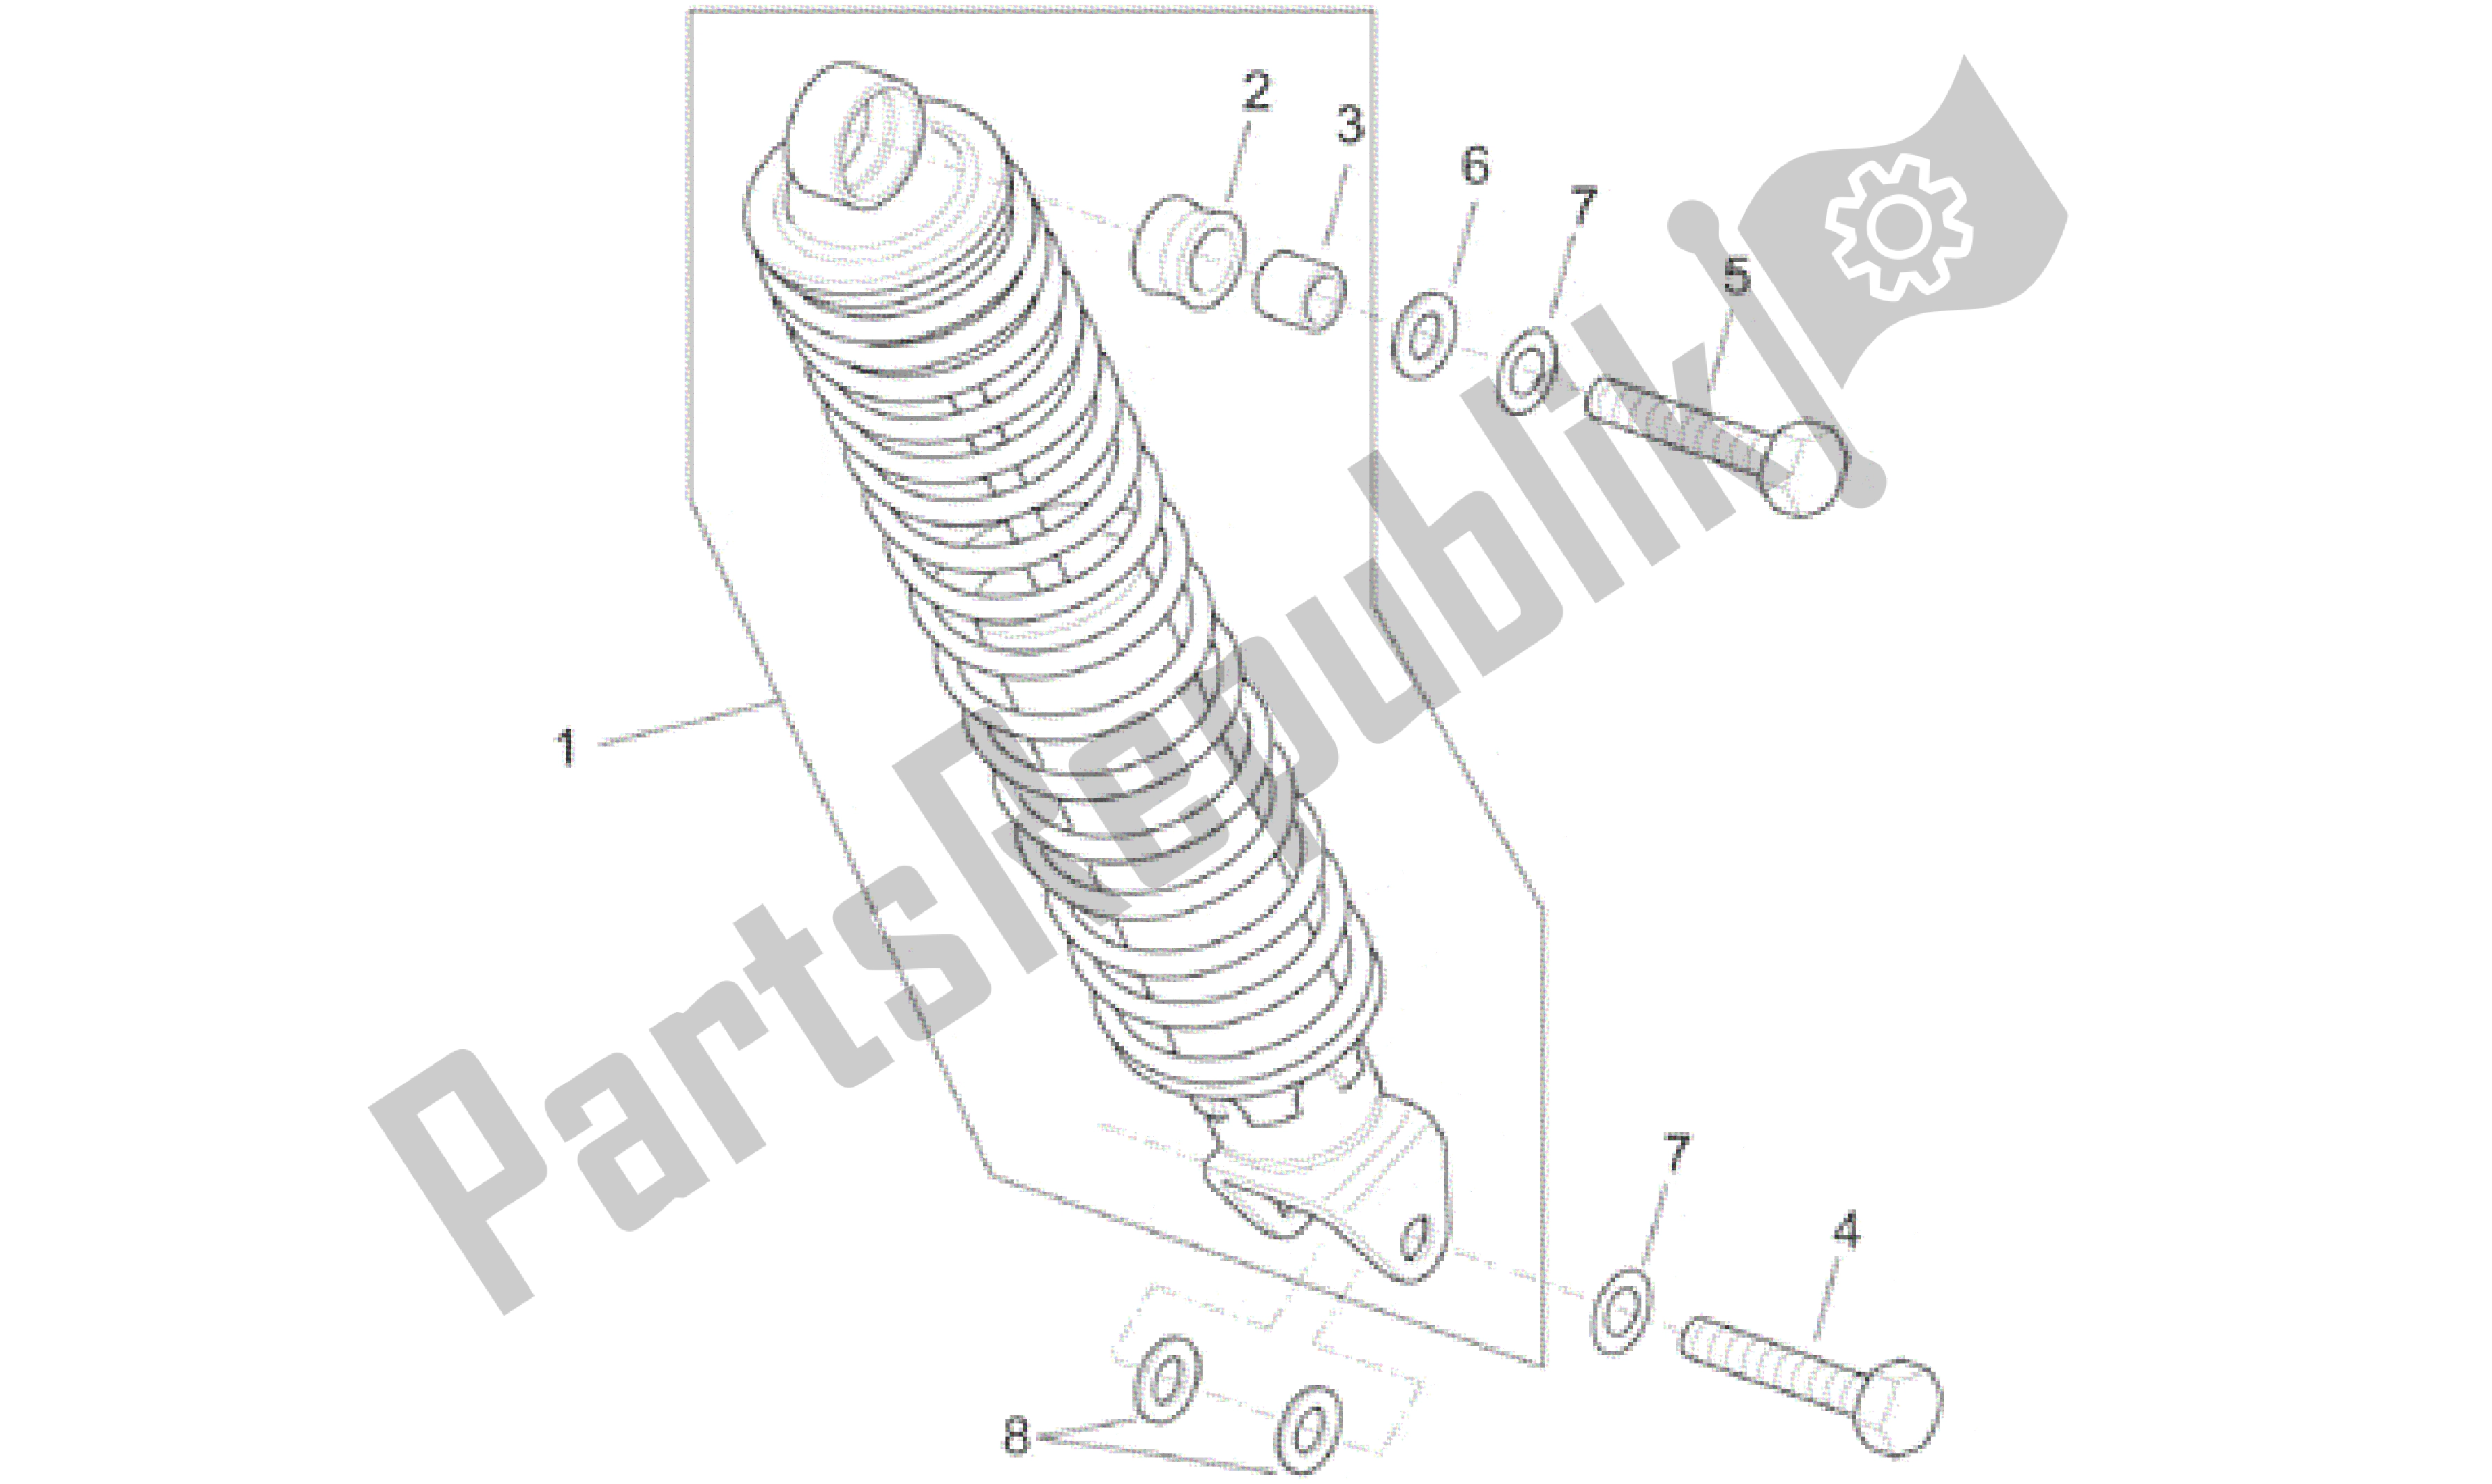 All parts for the Rear Shock Absorber of the Aprilia SR 150 1999 - 2001